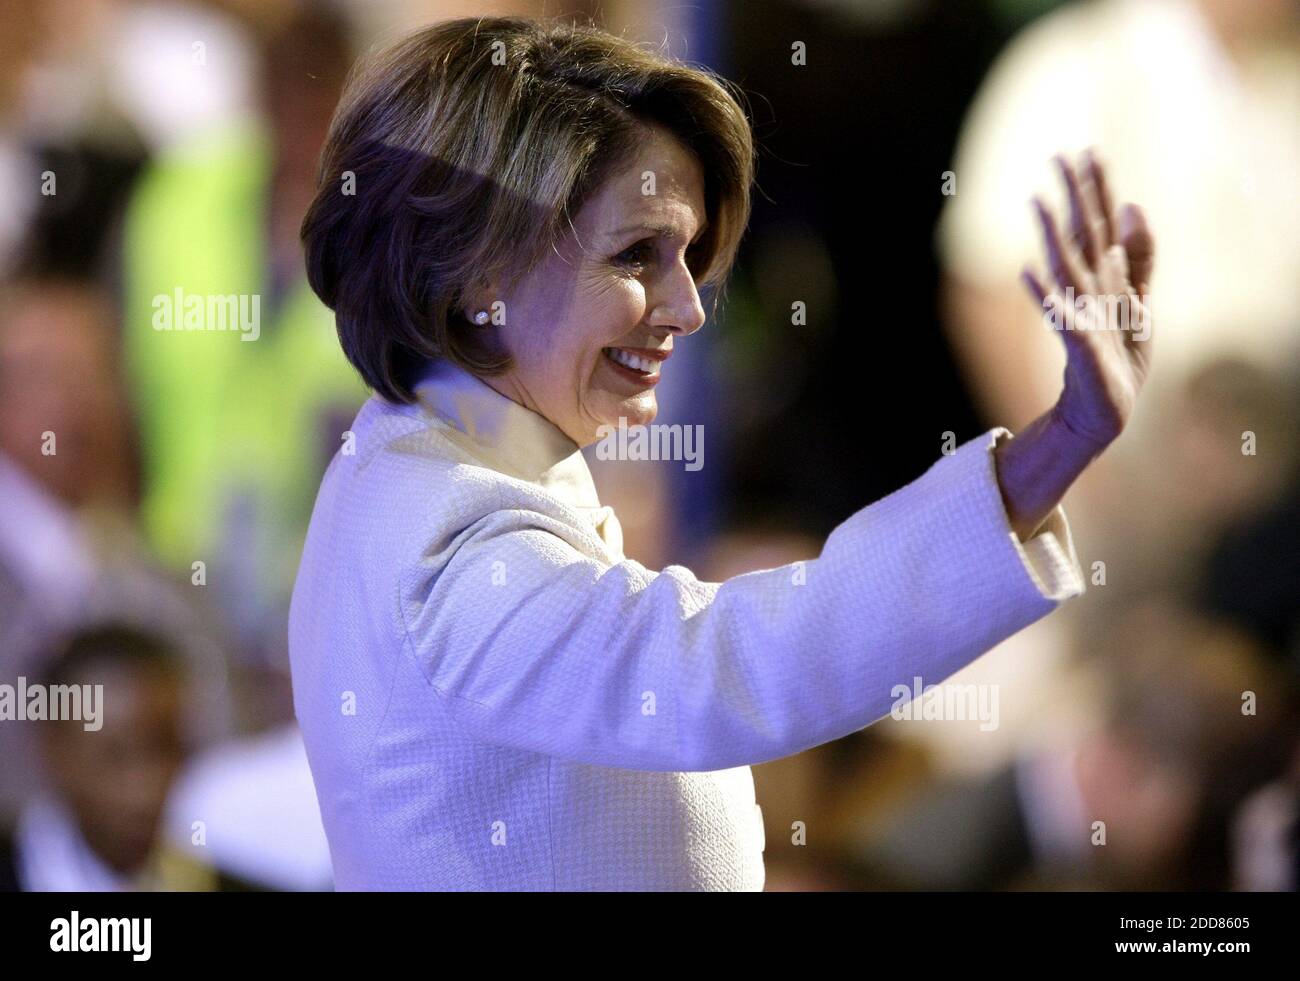 NO FILM, NO VIDEO, NO TV, NO DOCUMENTARY - Speaker of the U.S. House of Representatives Nancy Pelosi greets delegates on the first day of the 2008 Democratic National Convention in Denver, CO, USA on August 25, 2008. Photo by Chuck Kennedy/MCT/ABACAPRESS.COM Stock Photo